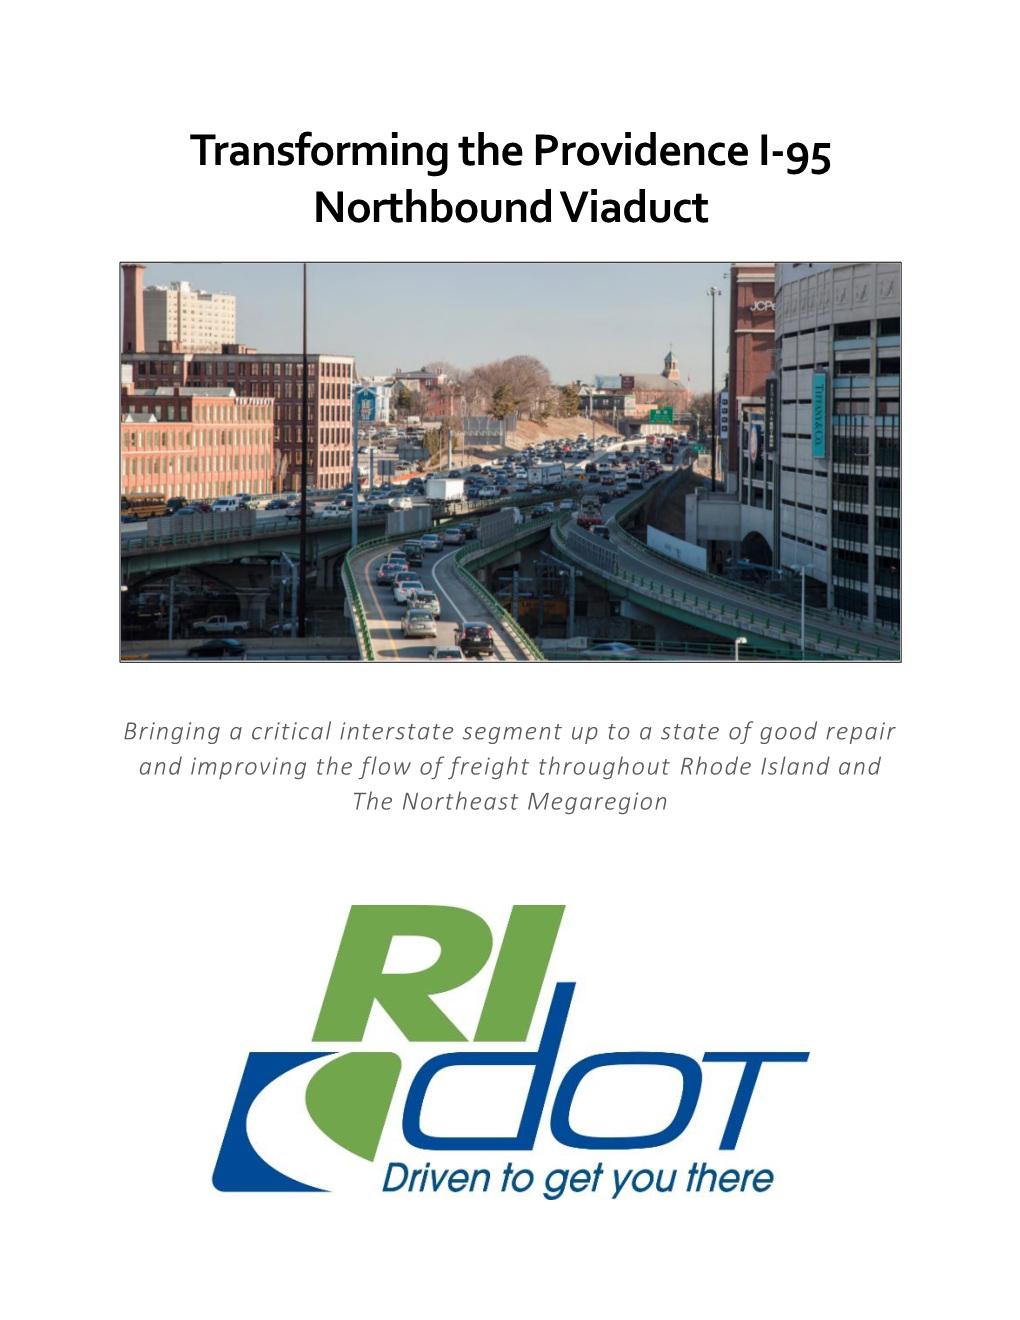 Transforming the Providence I-95 Northbound Viaduct